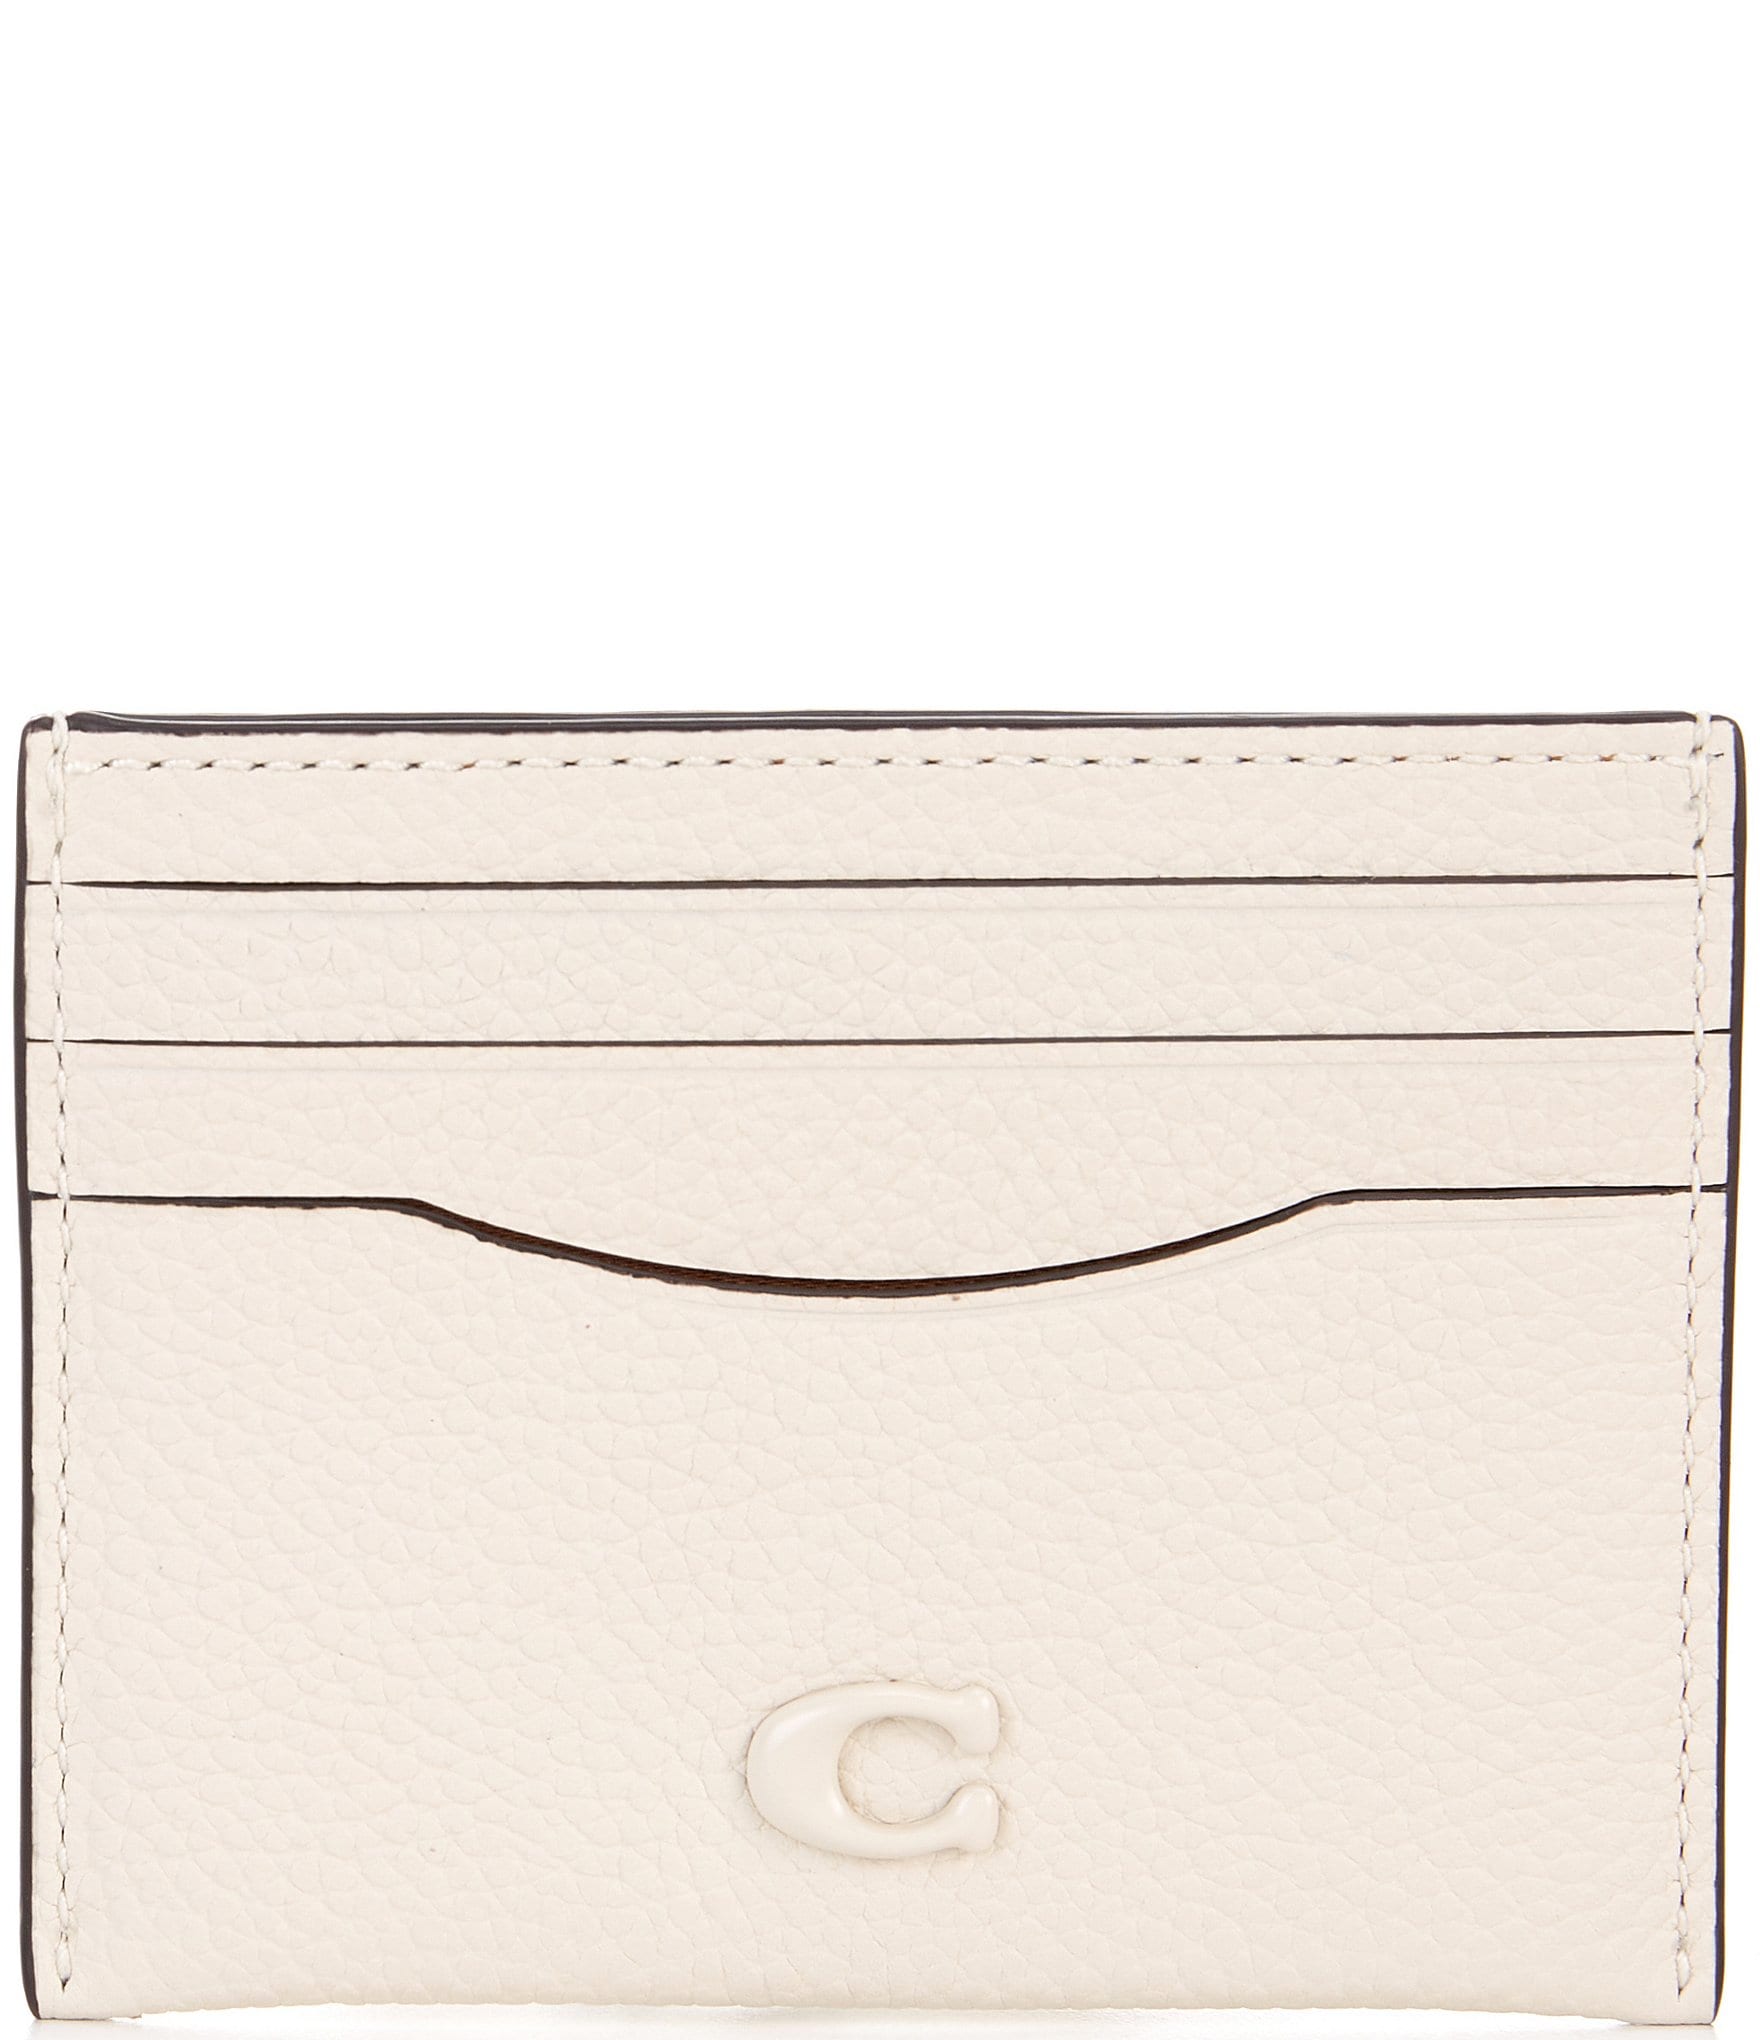 Coach Credit Card Cardholders for Women